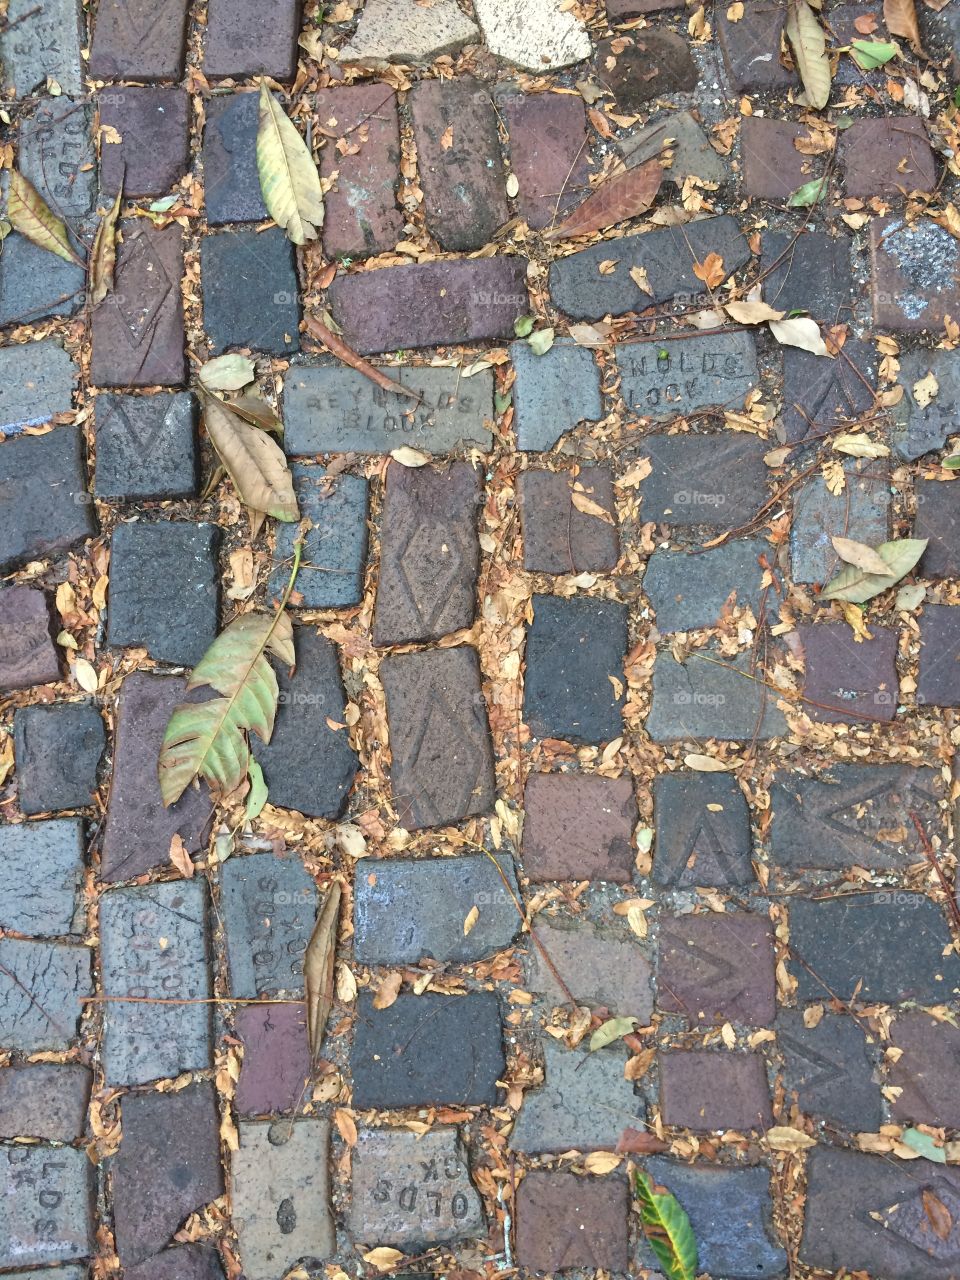 St. Augustine brick pathway with leaves
